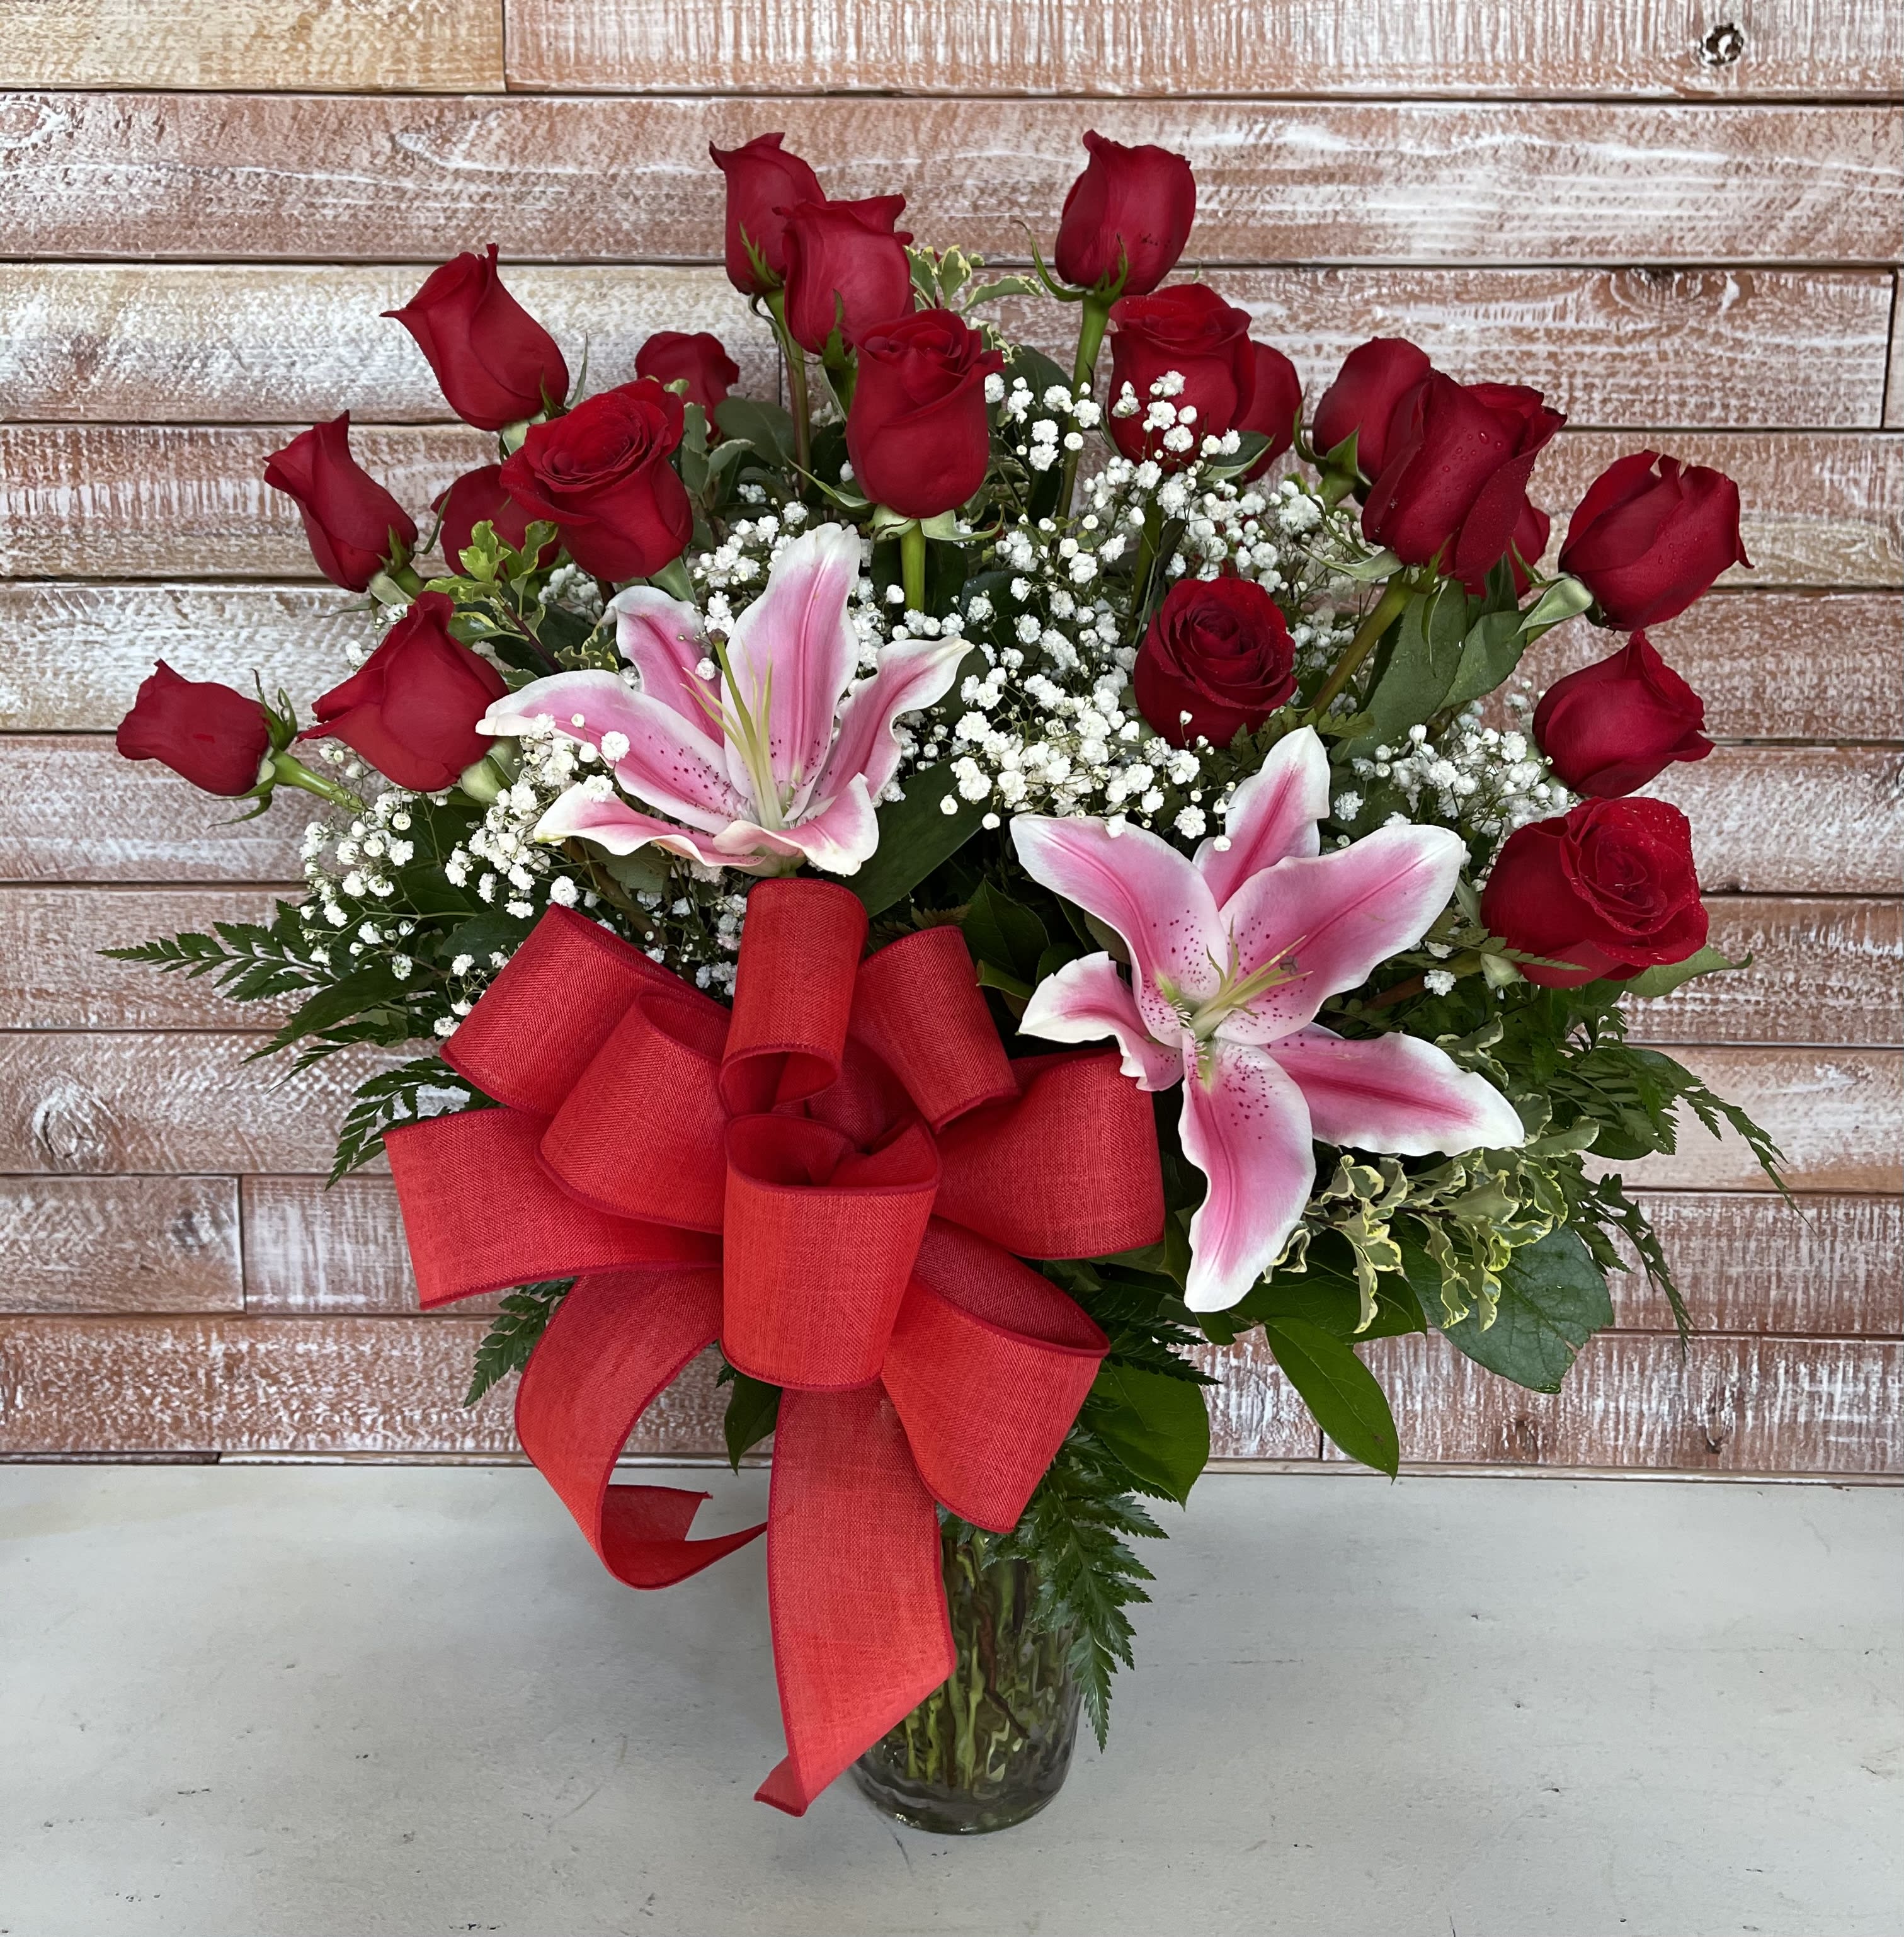 2 Dozen Vase  - 2 dozen of beautiful red roses with the babys breath to accent it. A grand arrangement that will sure to make a statement. Send the one you love a big statement of love. 